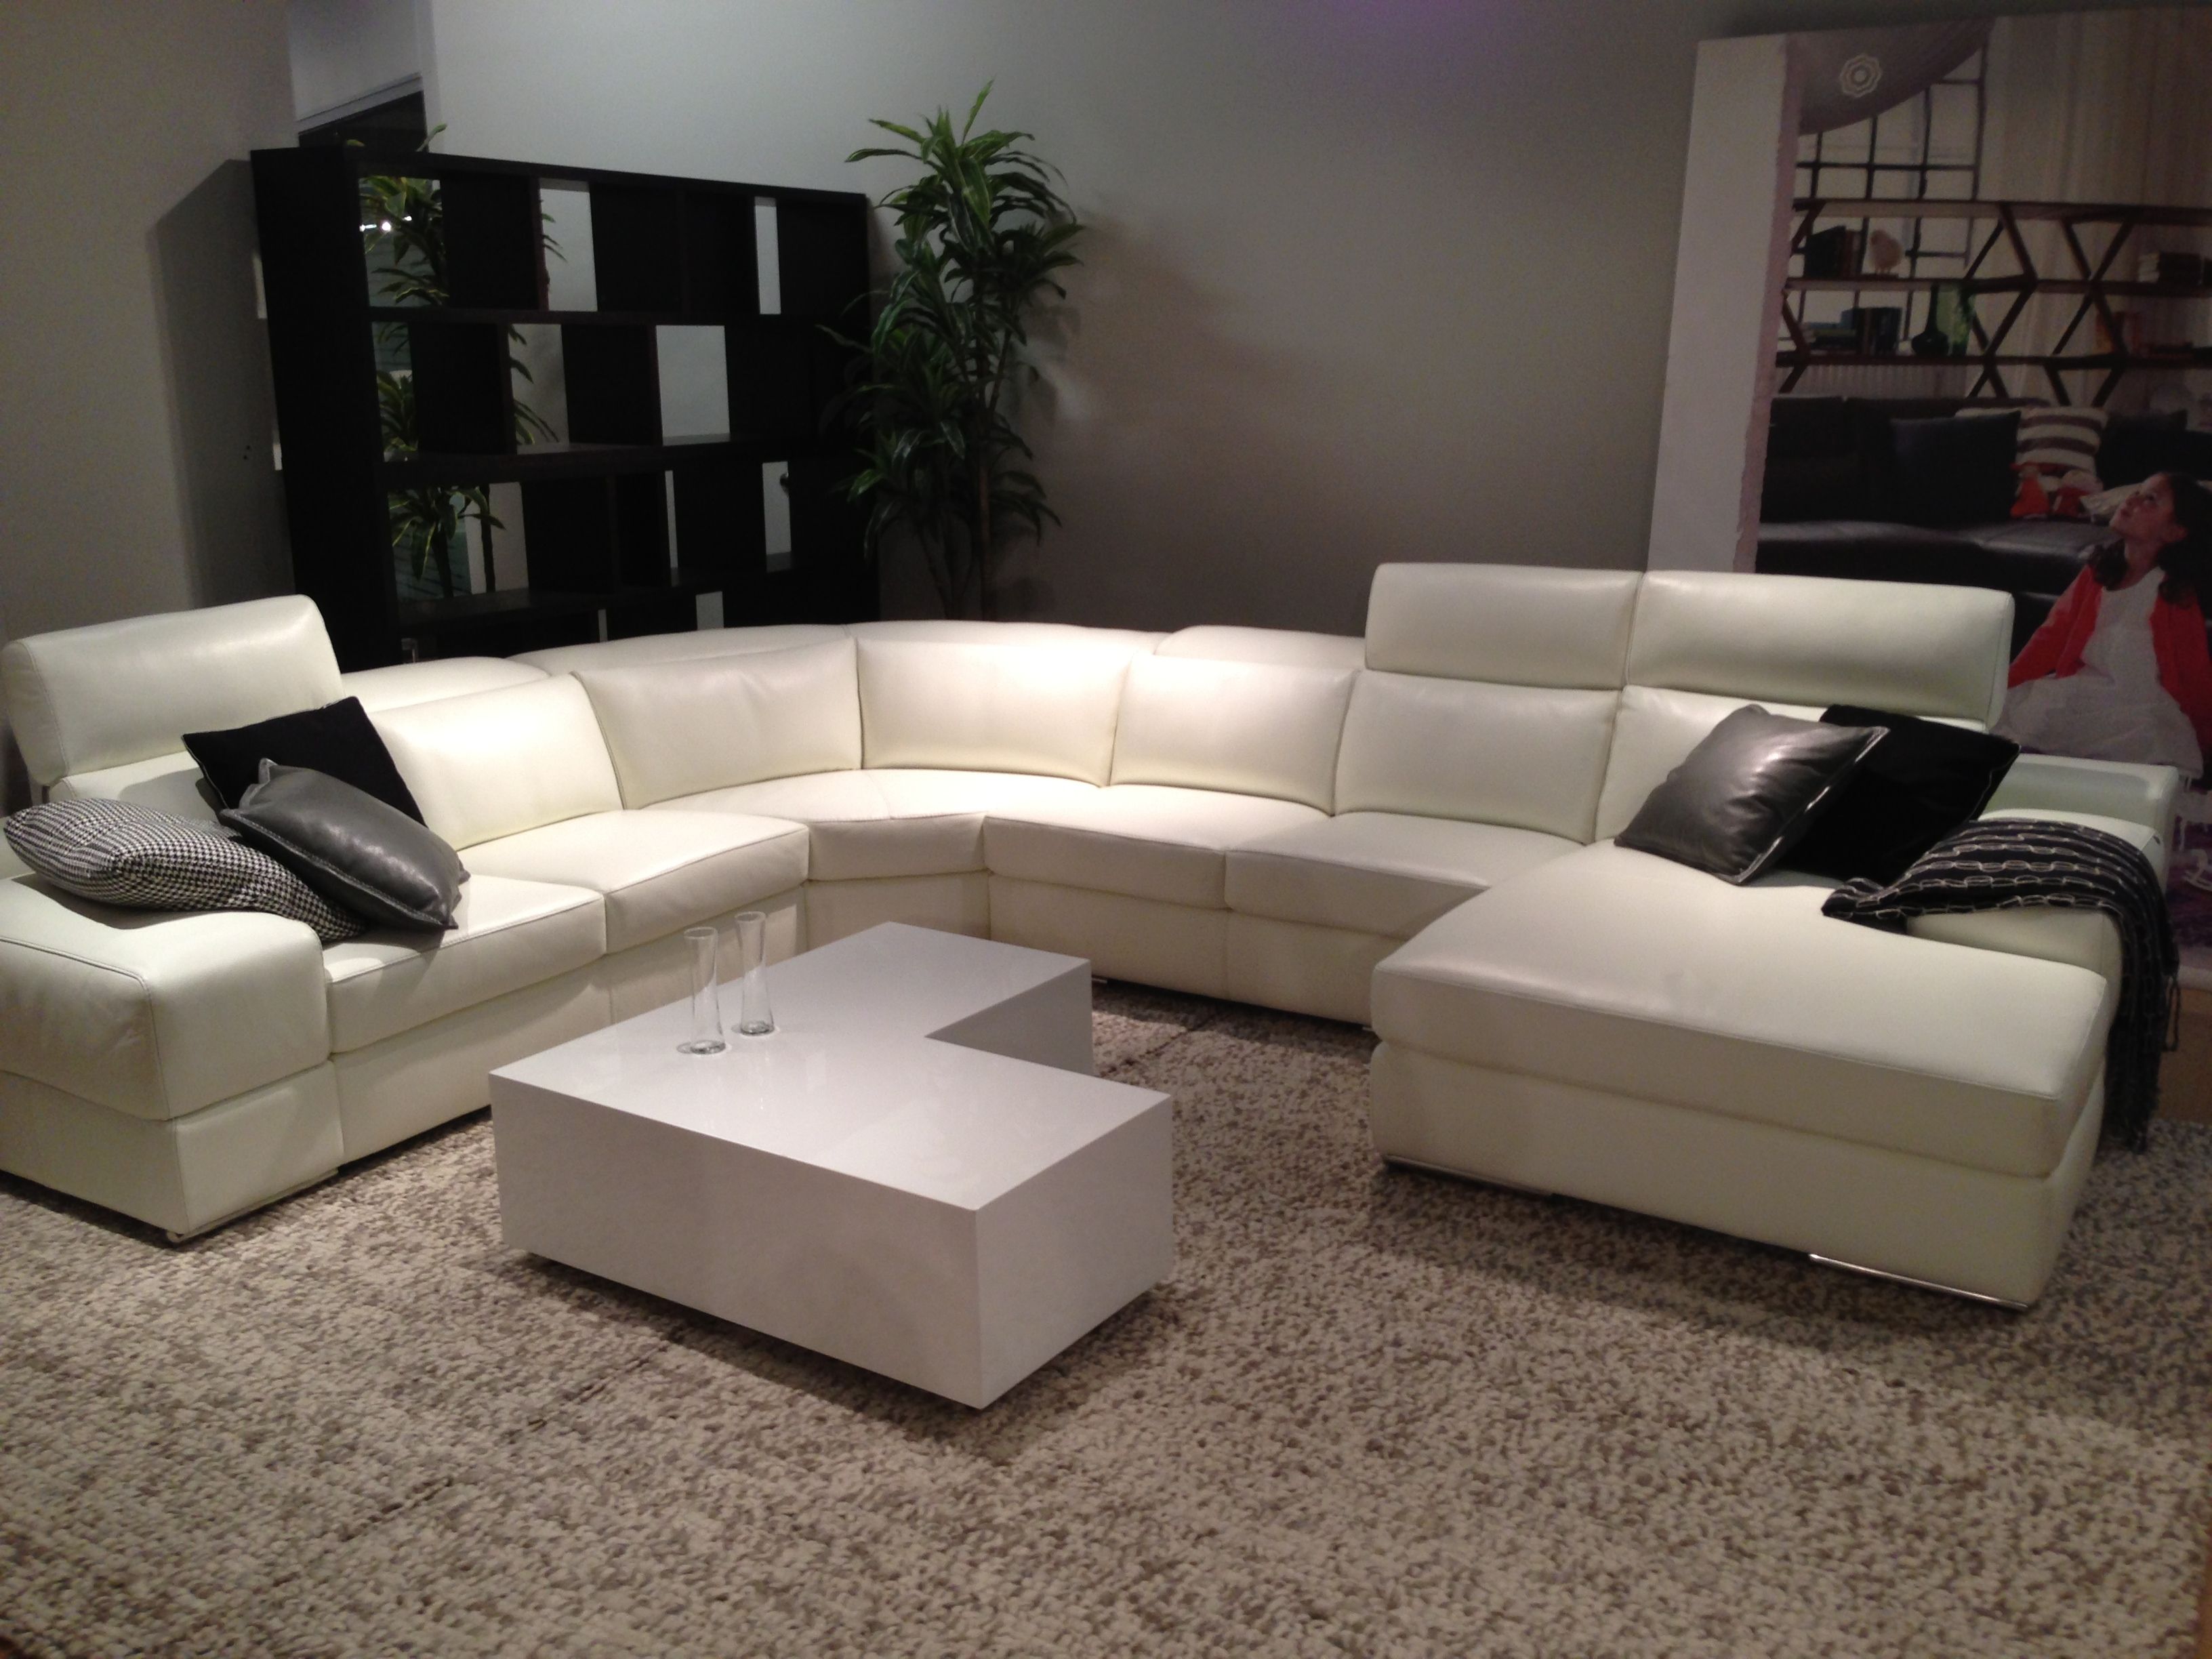 Modern White Leather Sectional Htl Portland Oregon 1,632×1,224 Throughout Portland Sectional Sofas (View 5 of 10)